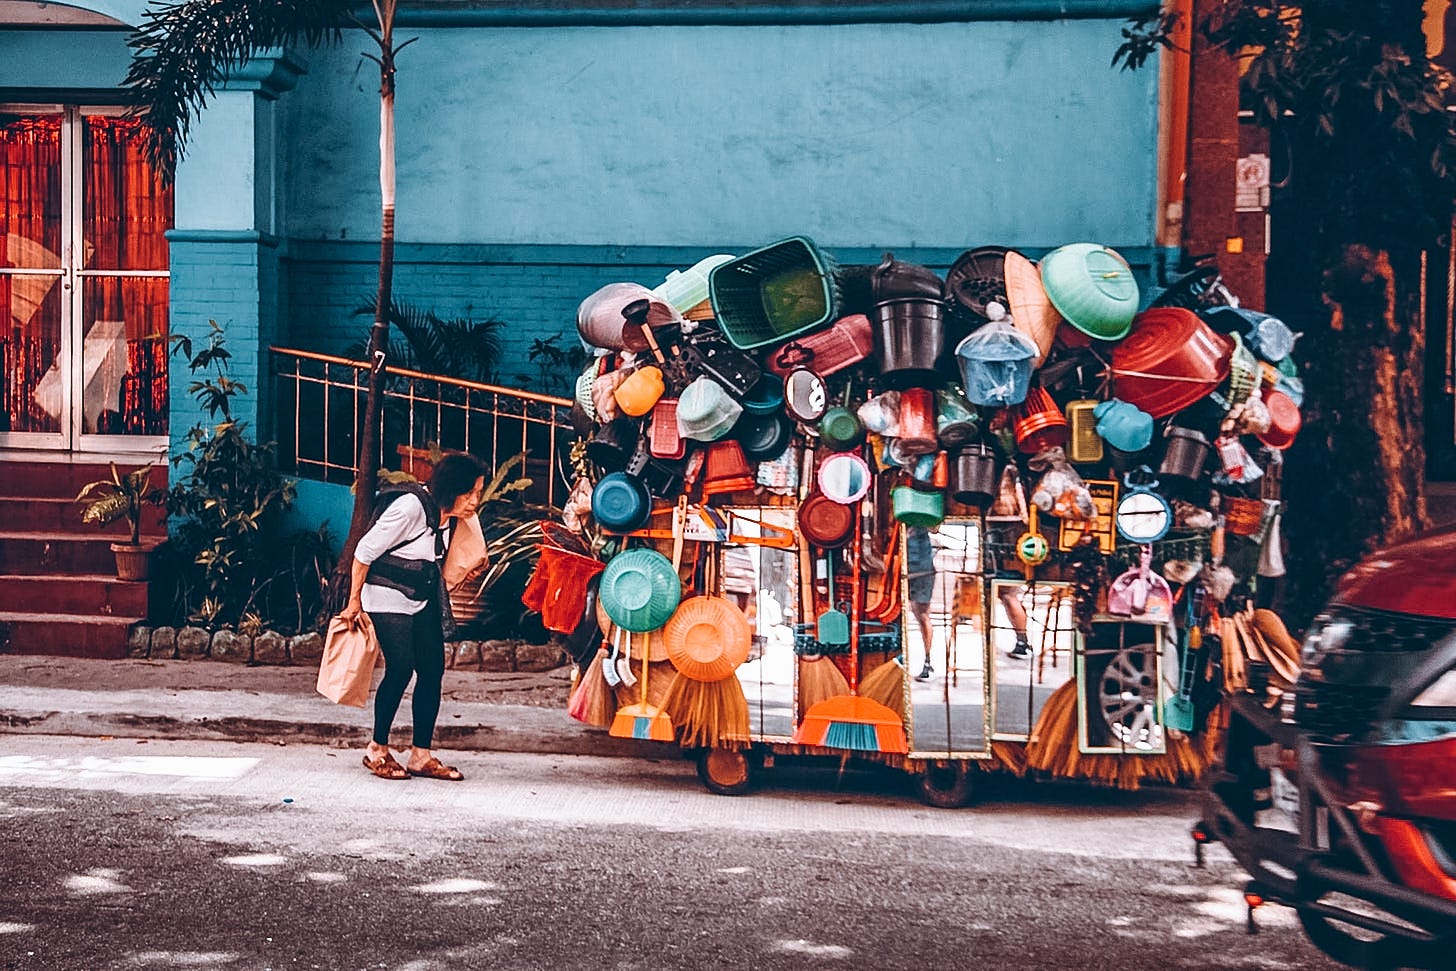 An old woman and her cart full of plastic wares in Manila: A photo by David Elikwu